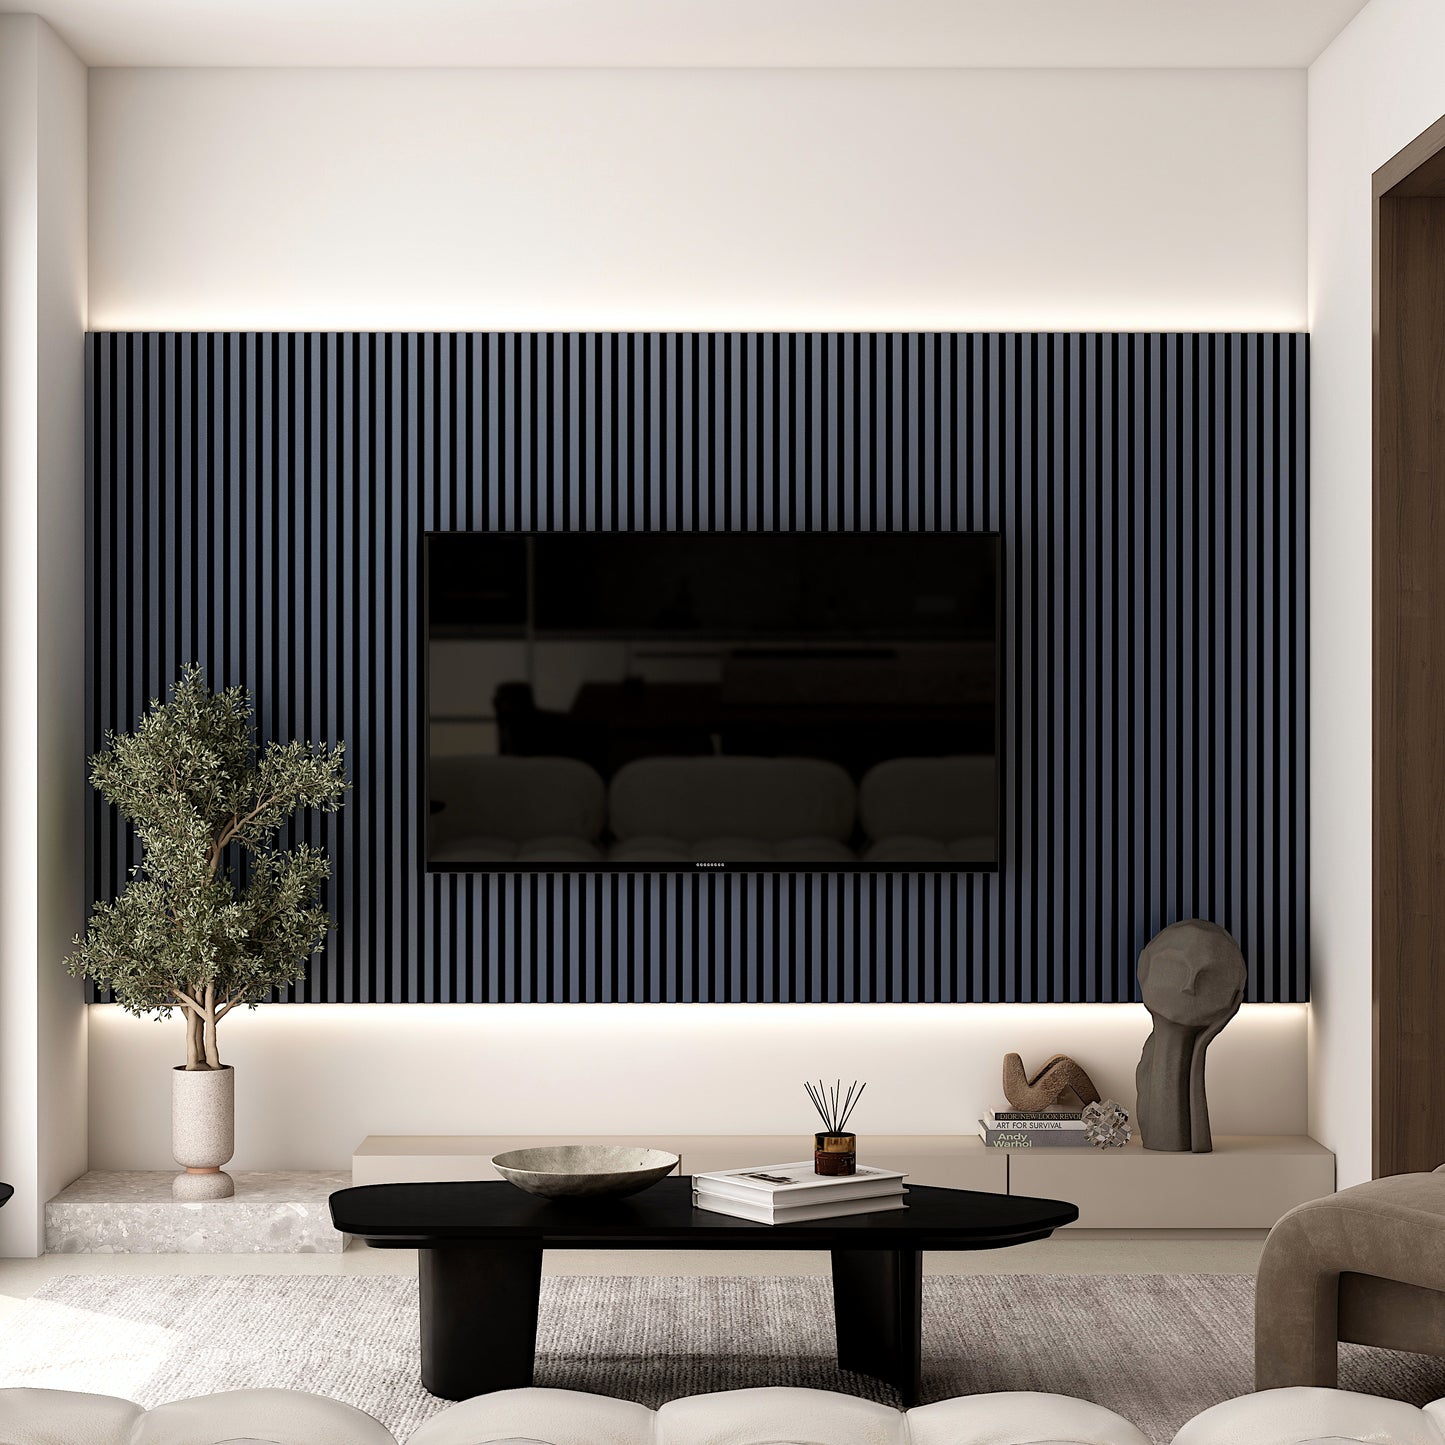 ARQ® Acoustic Colored Wooden Wall Slat Panel